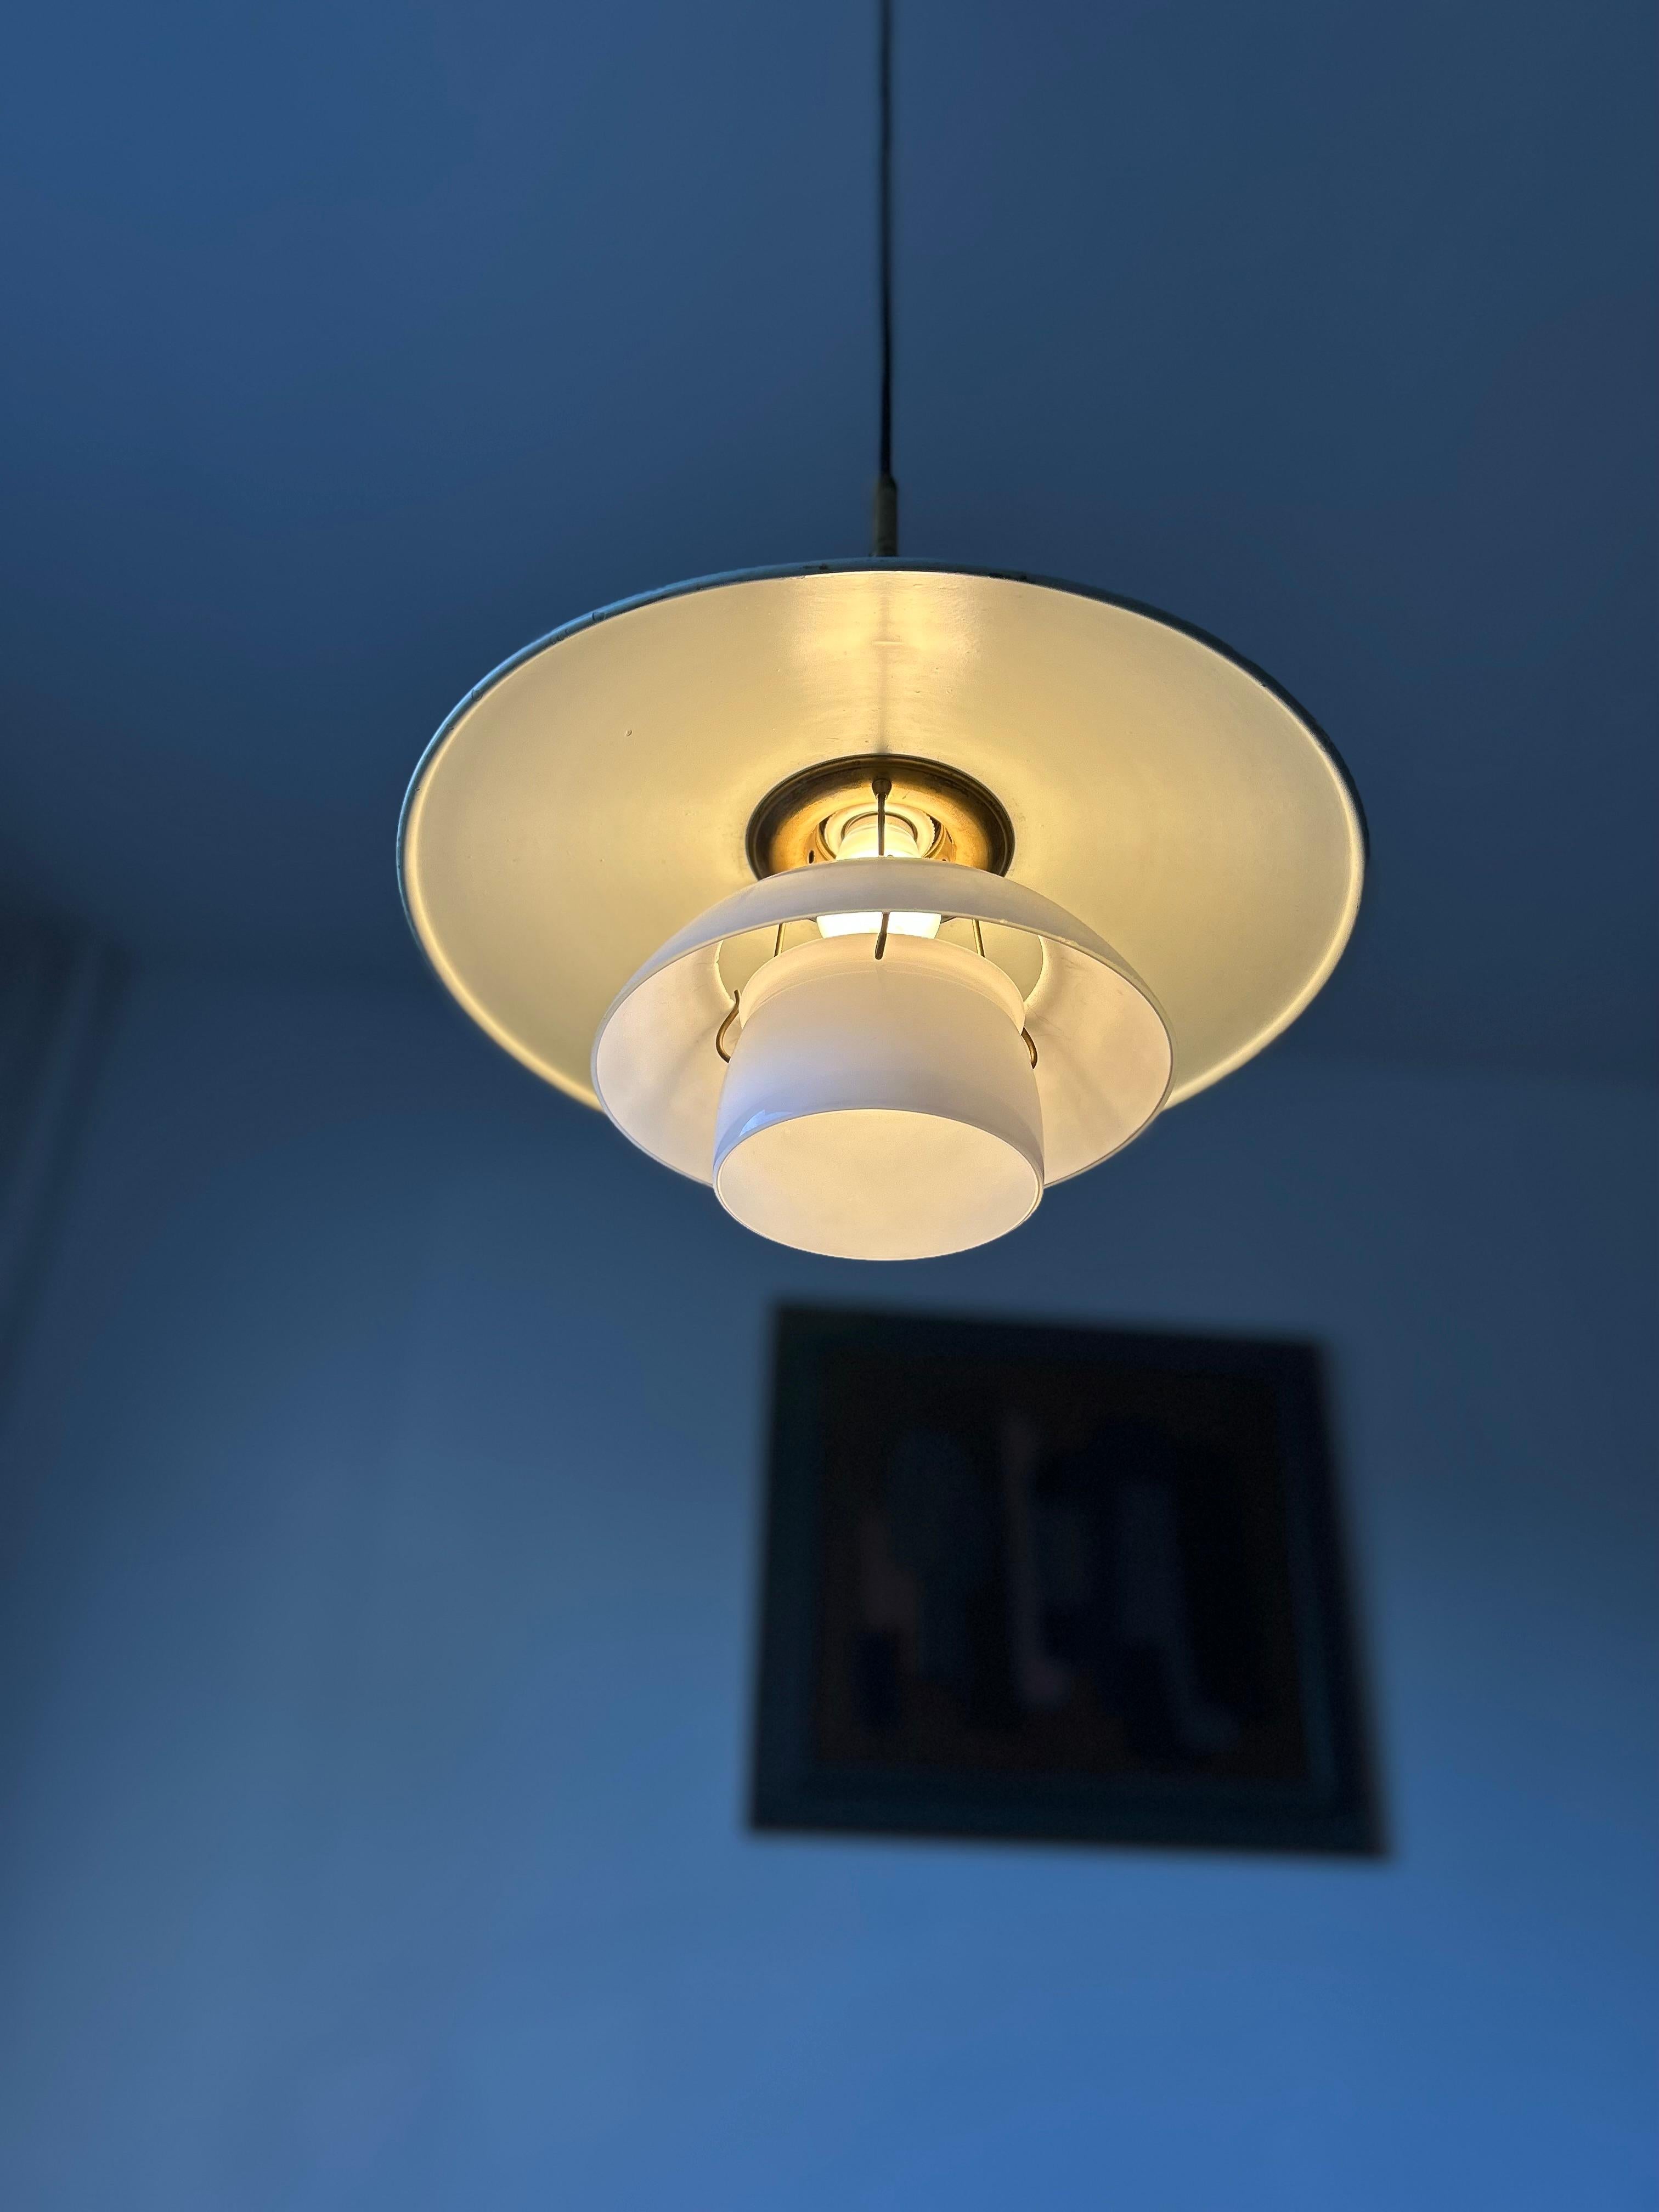 Rare Poul Henningsen PH 3,5/3 pendant with a top shade of white lacquered zinc and a middle and bottom shade in two layer opal glass and a top of beautiful natural patinaed brass.
The lamp is in good original condition.
The PH lamp is the perfect